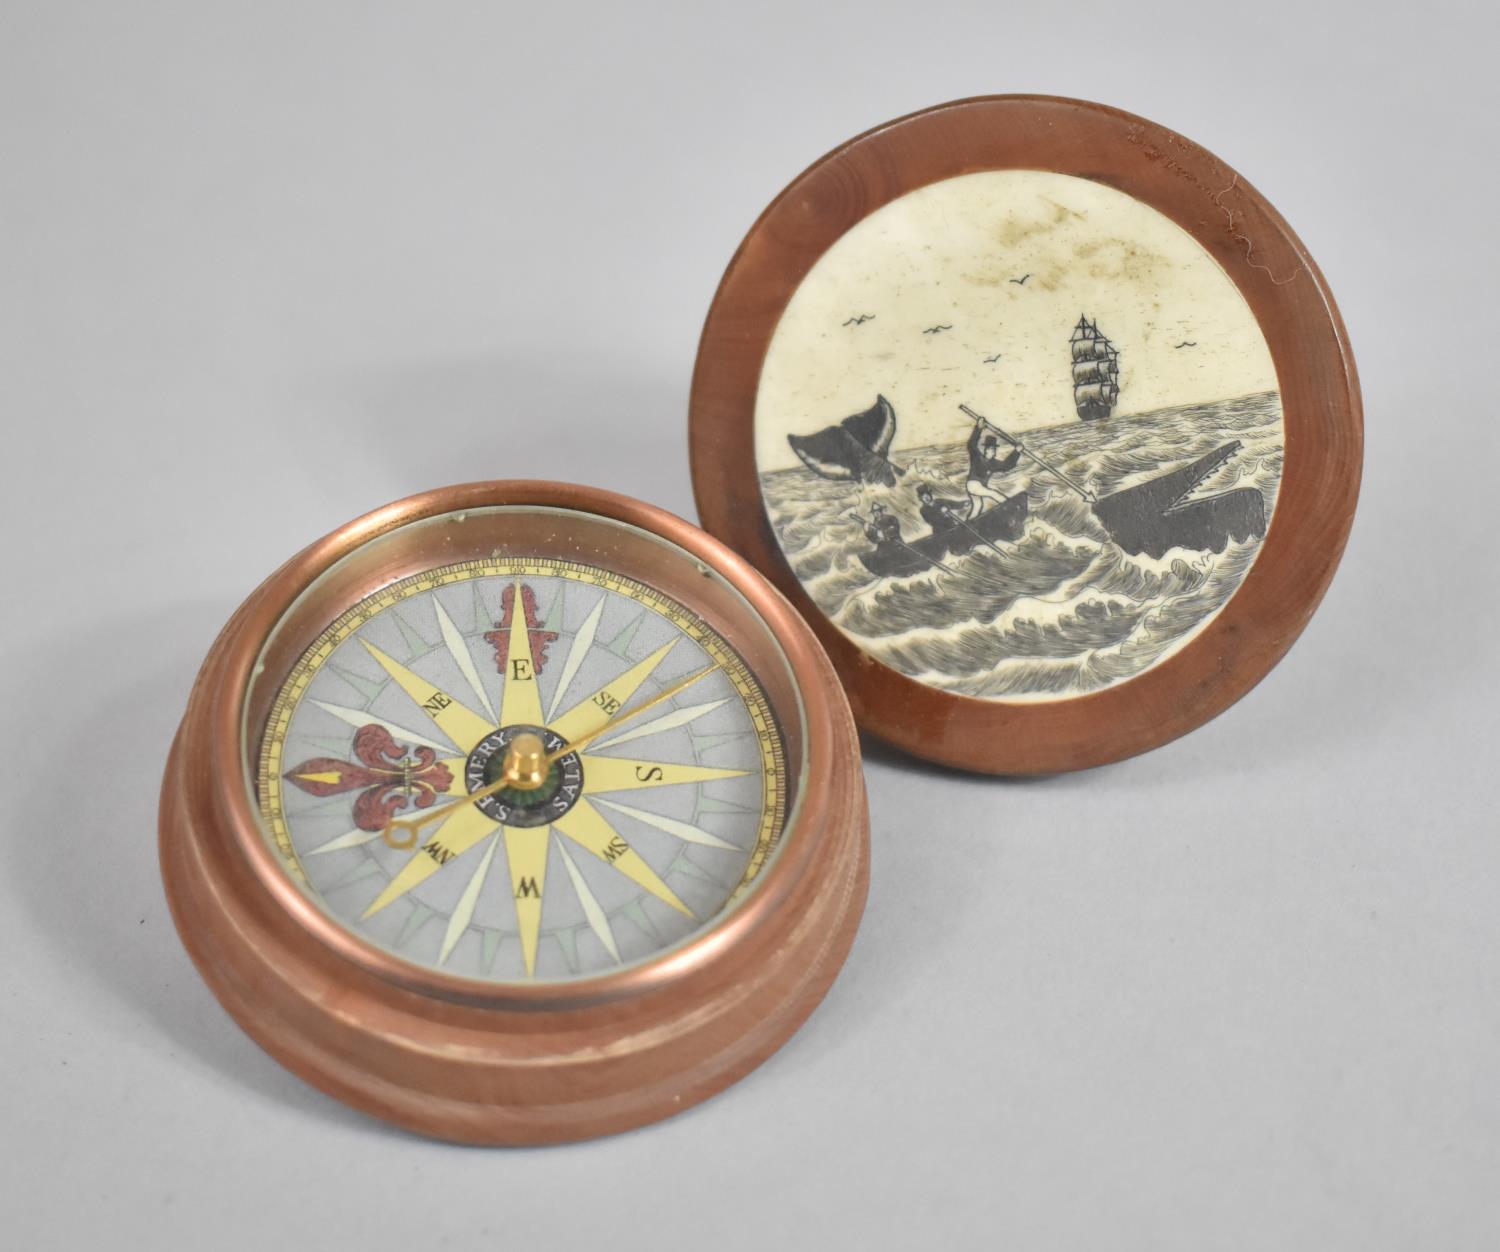 A Reproduction Circular Wooden Cased Compass with Carved Scrimshaw Bone Whaling Mount, 6.5cm